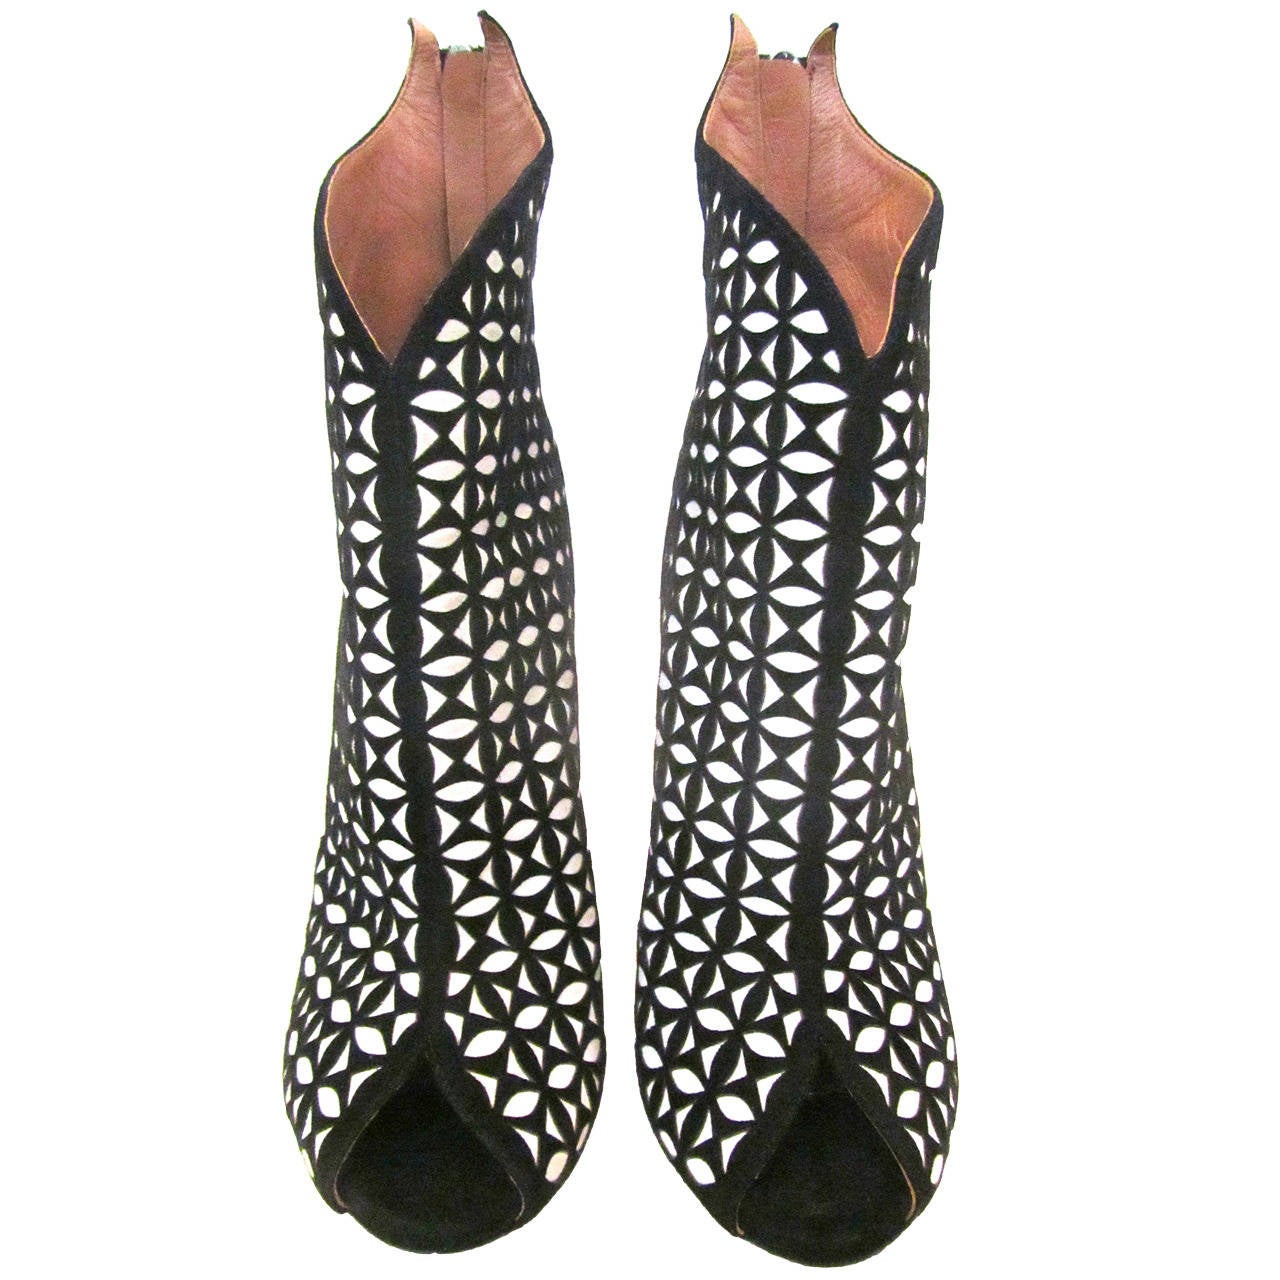 New Alaia Open Toed High Heel Boots - 37 - Black and White Suede For Sale